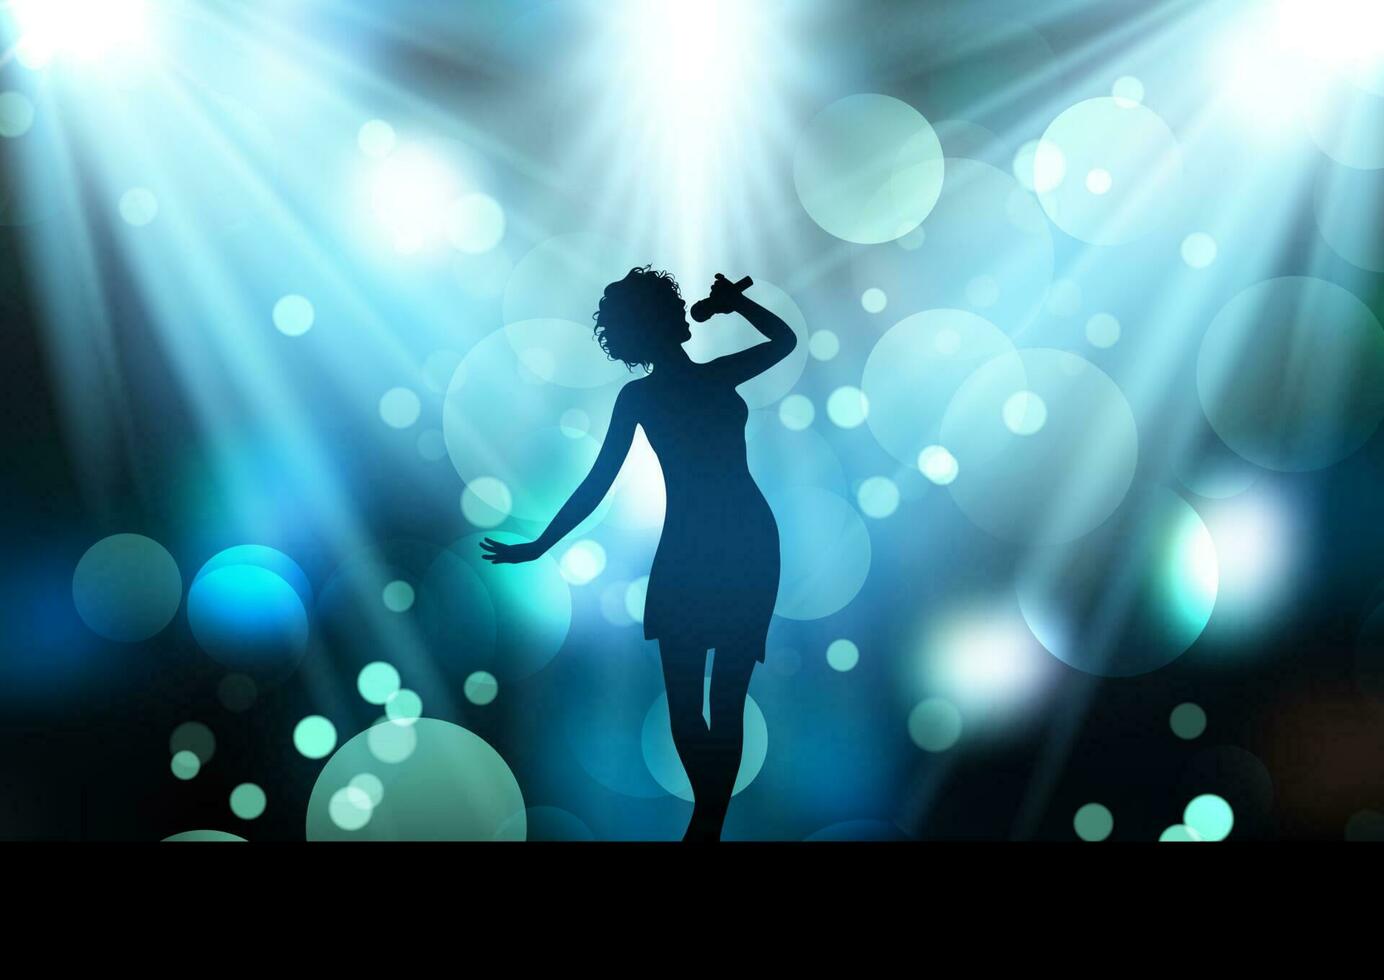 silhouette of a female singer on a stage under spotlights vector